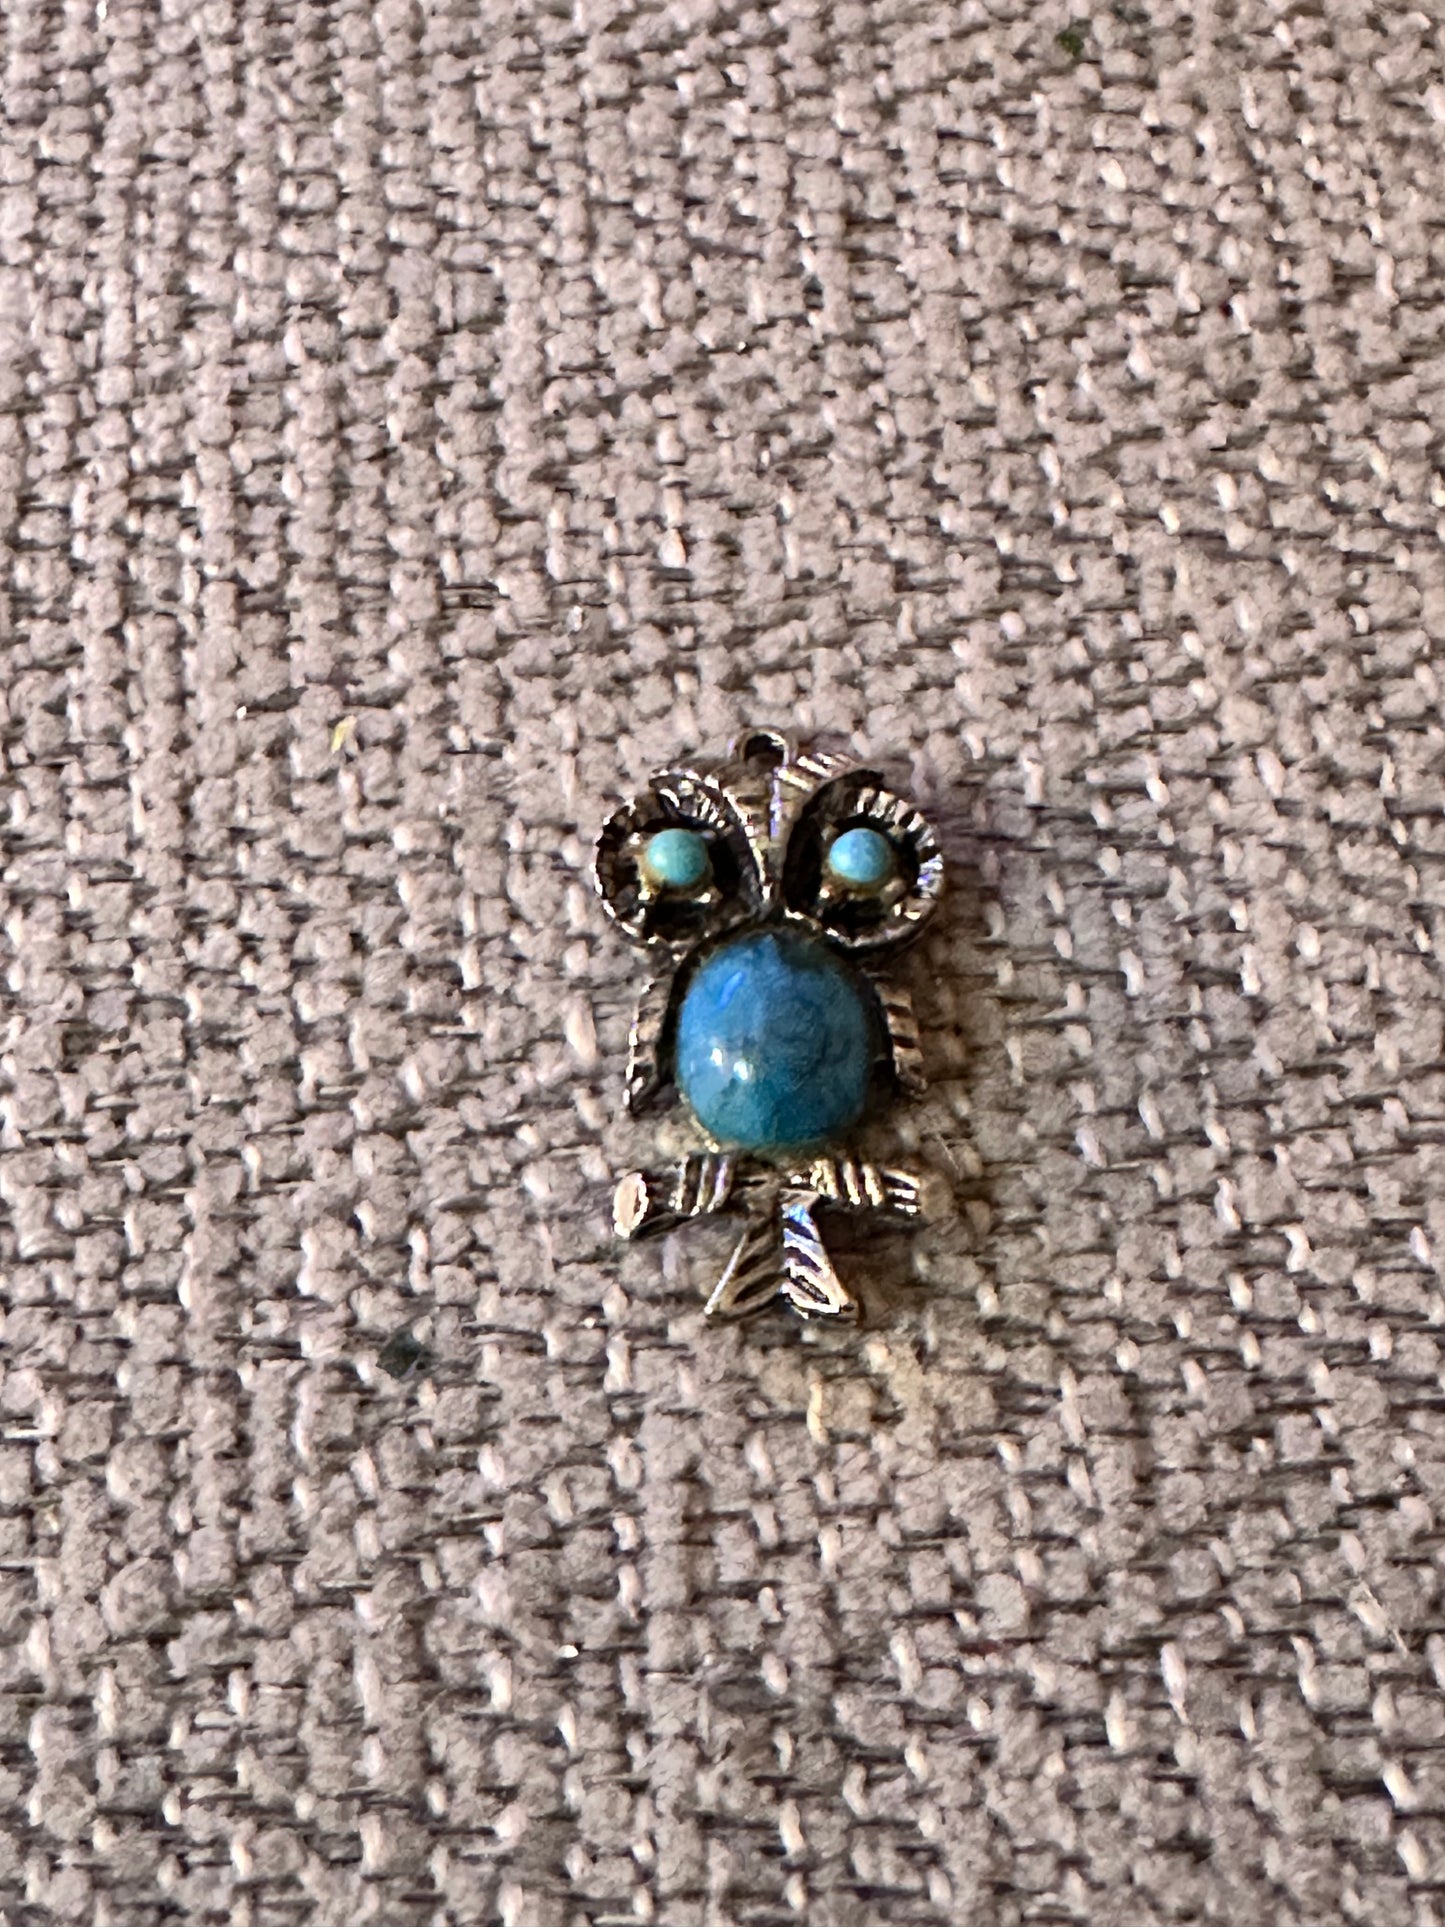 MAD MEN: Sally's Vintage Necklace Charms